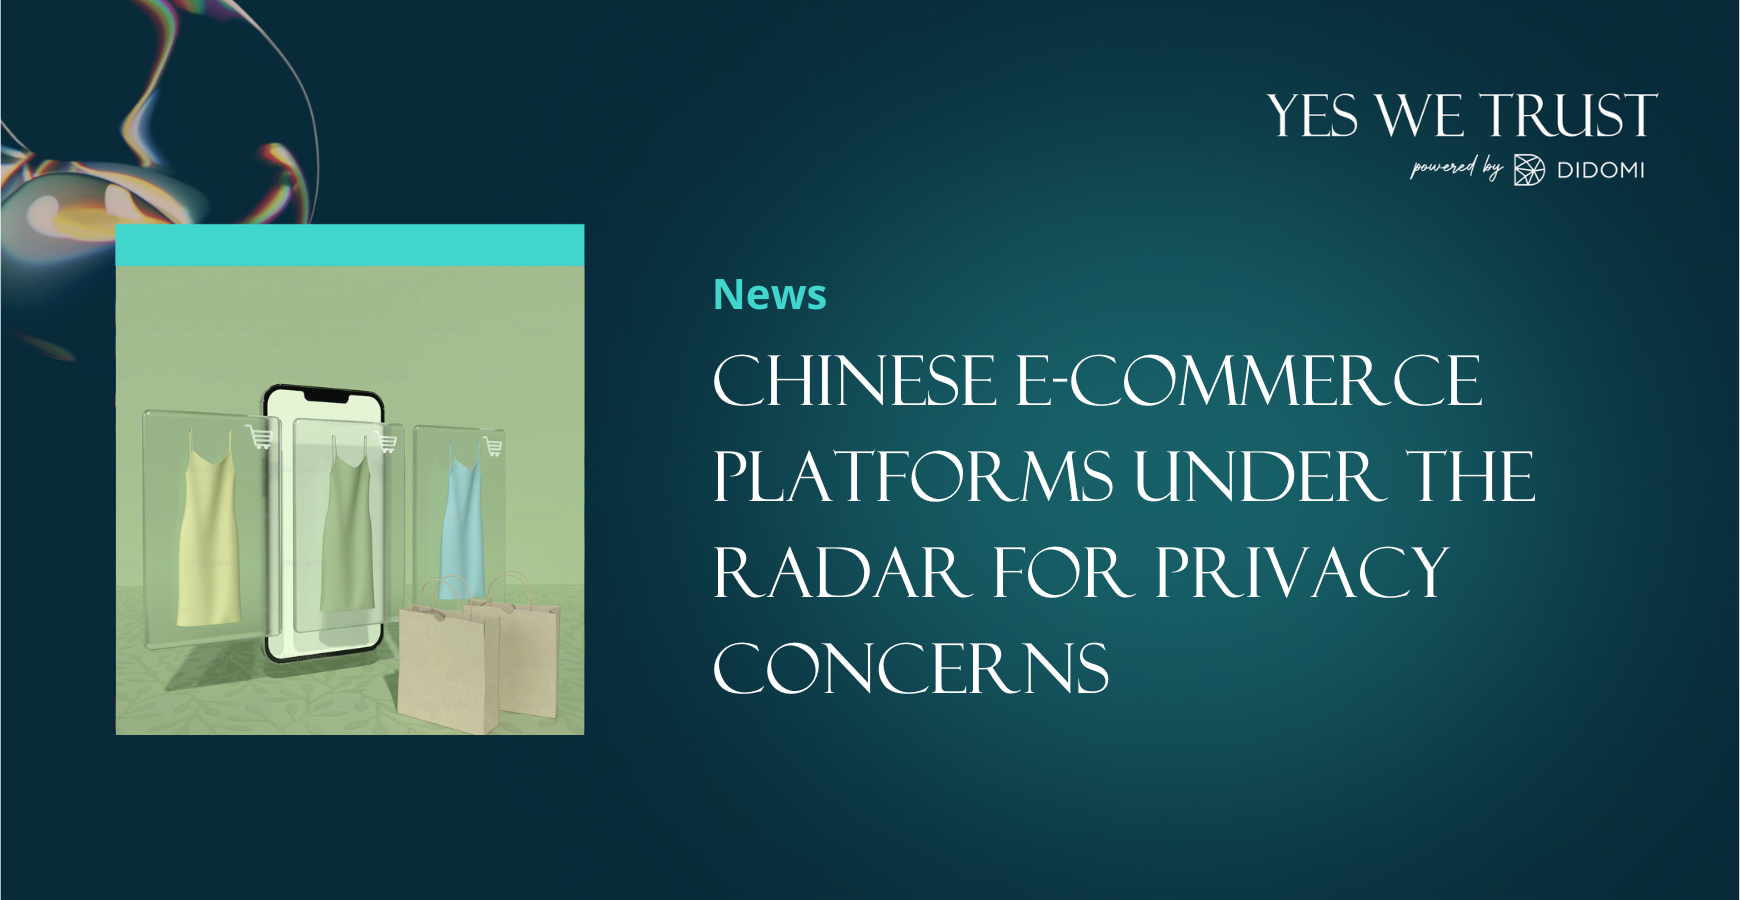 Chinese e-commerce platforms under the radar for privacy concerns